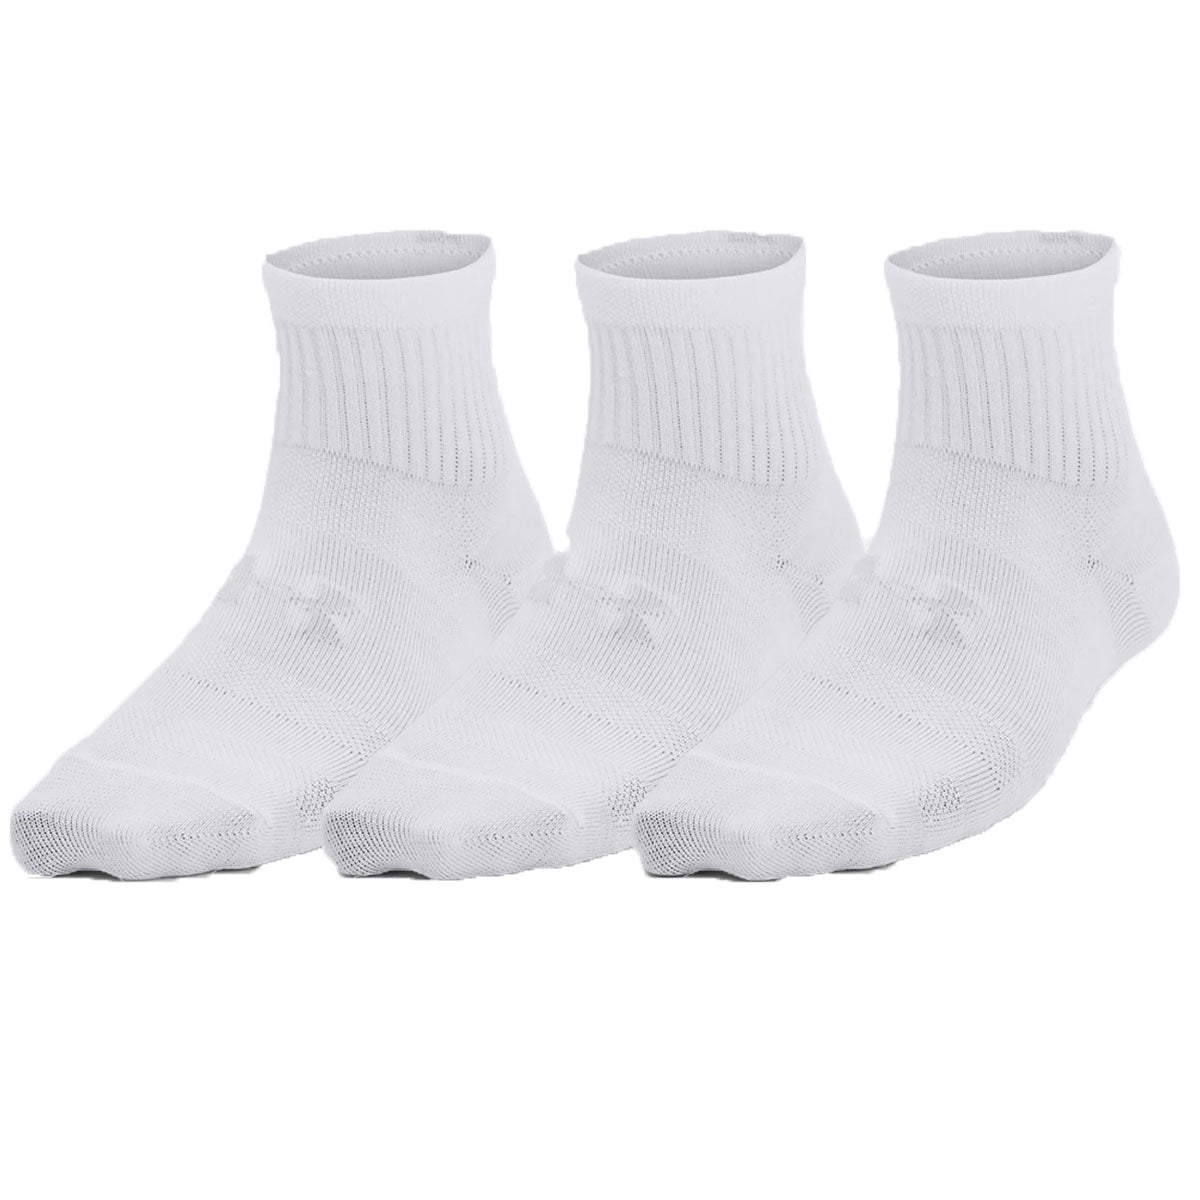 Under Armour Essential 3 Pack Quarter Socks - Youth - White/Halo Grey